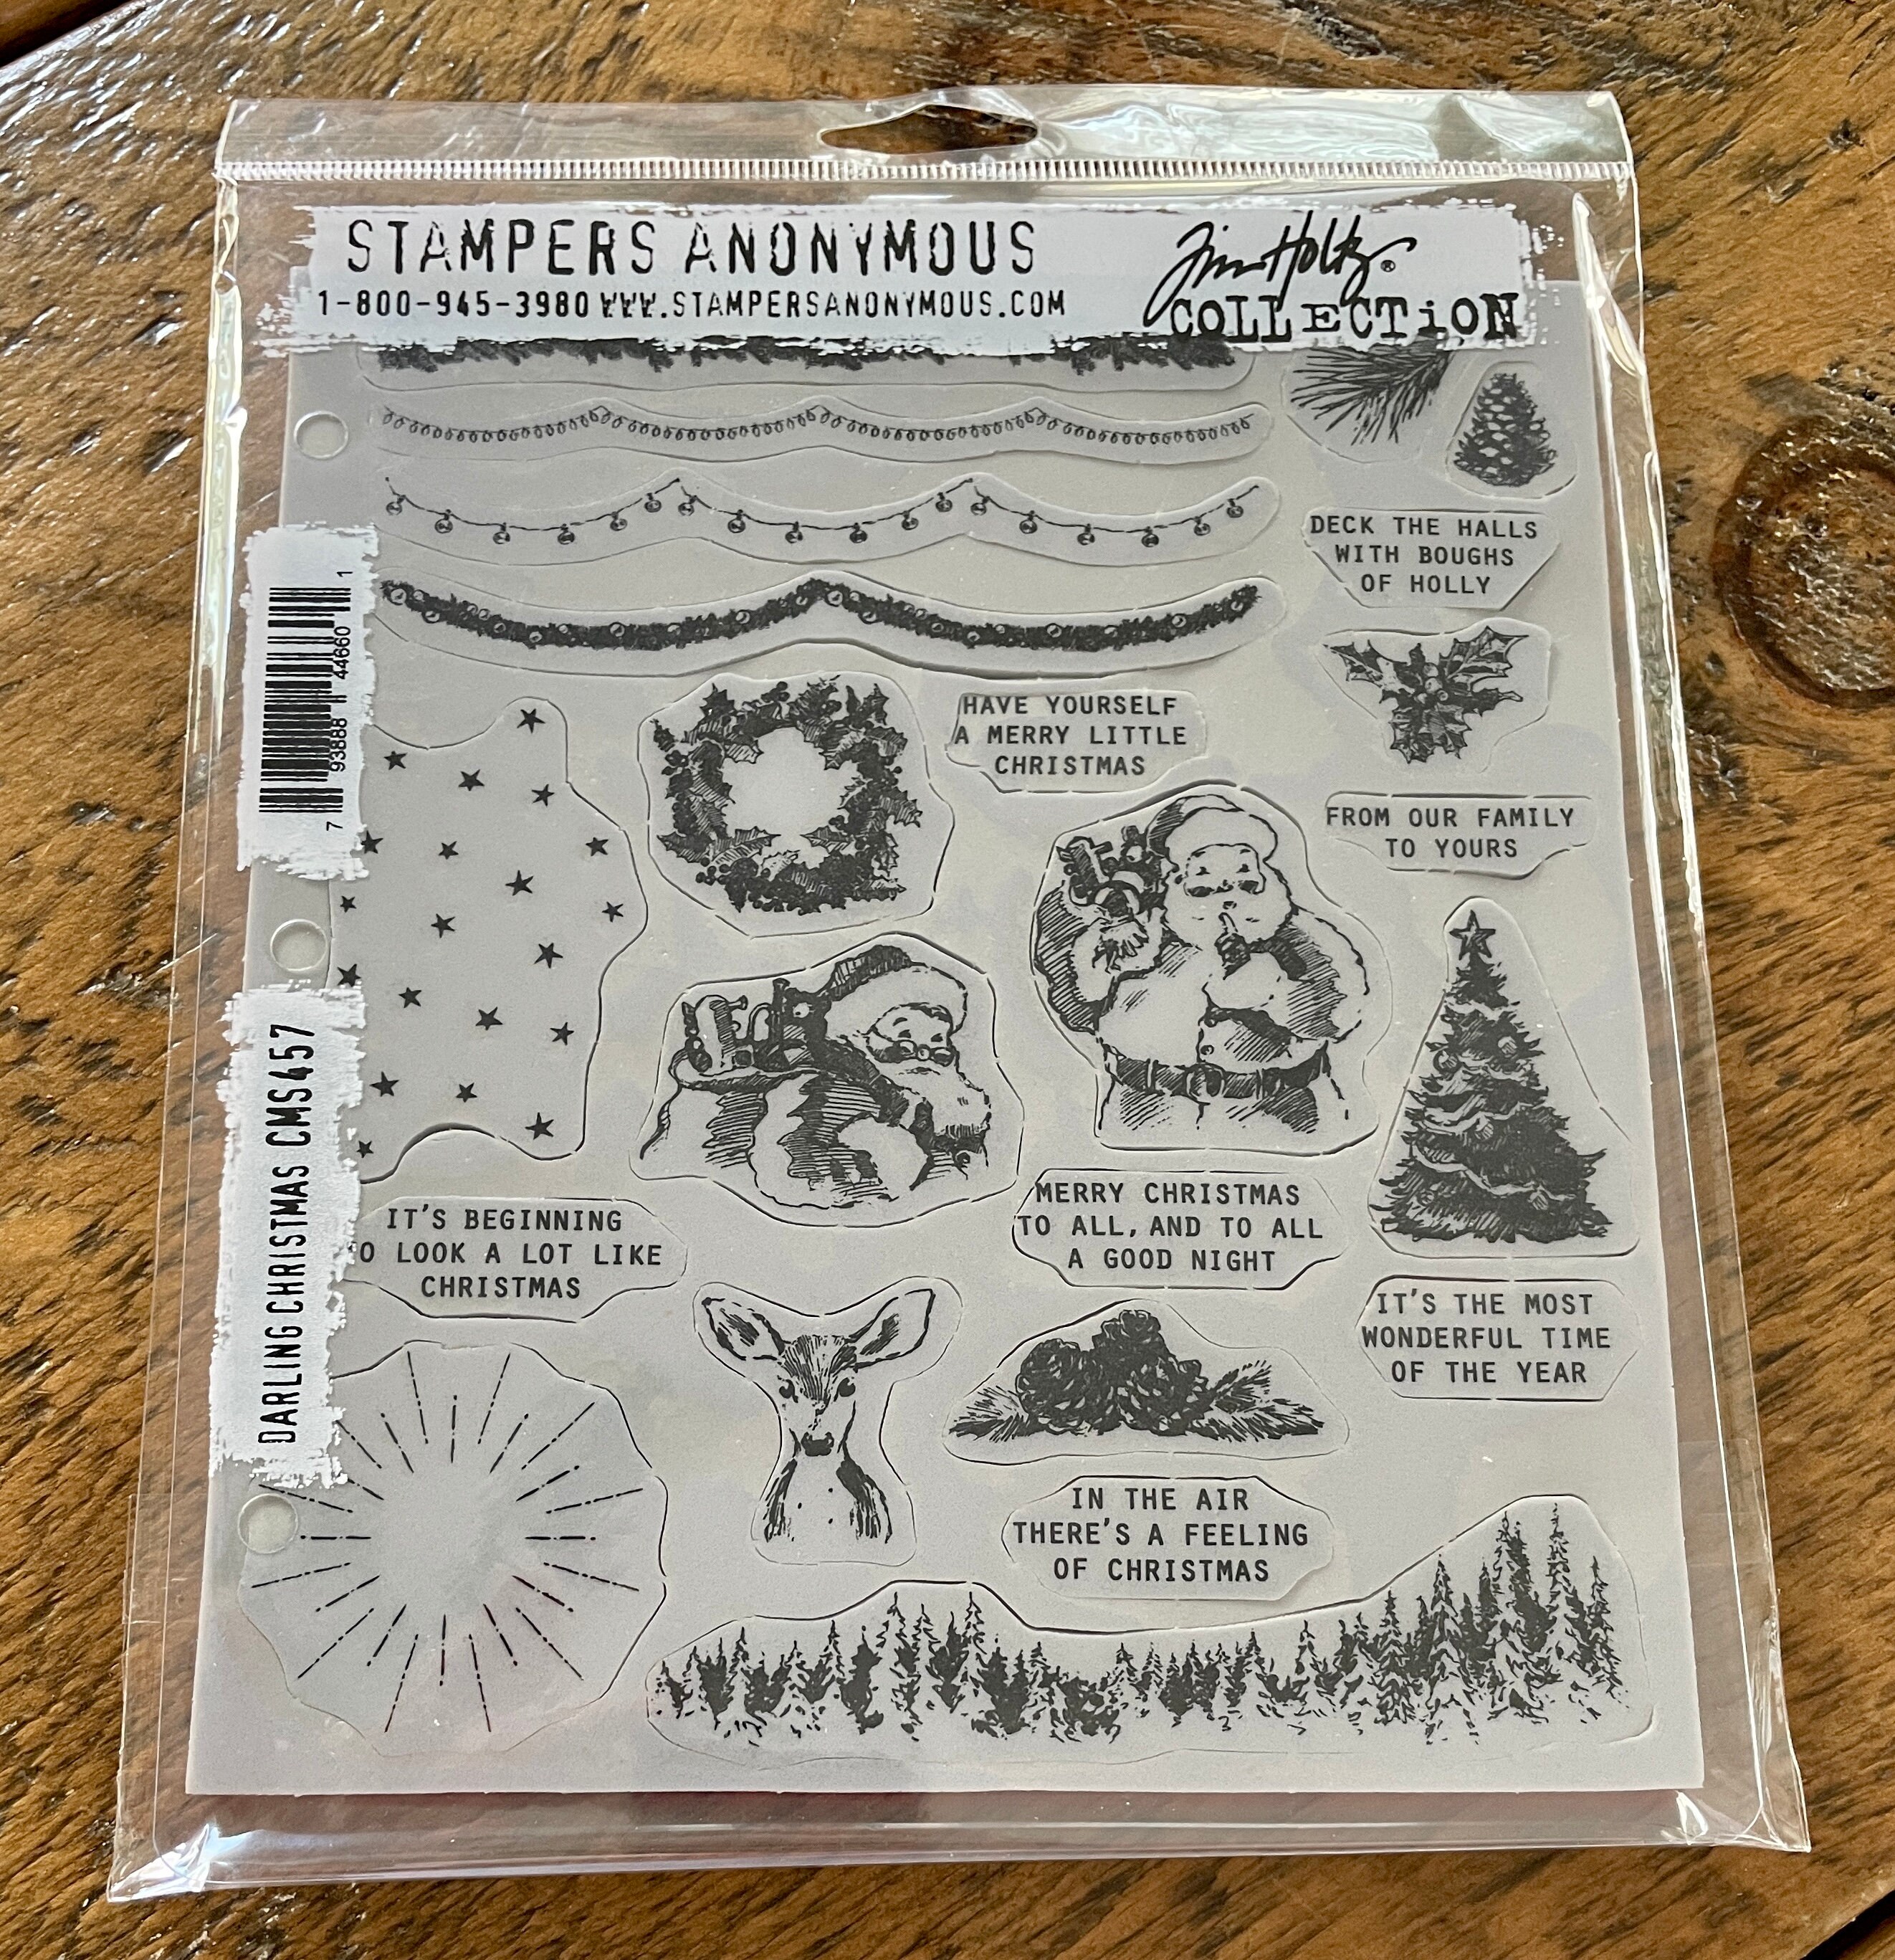 Tim Holtz Cling Rubber Stamps - Darling Christmas